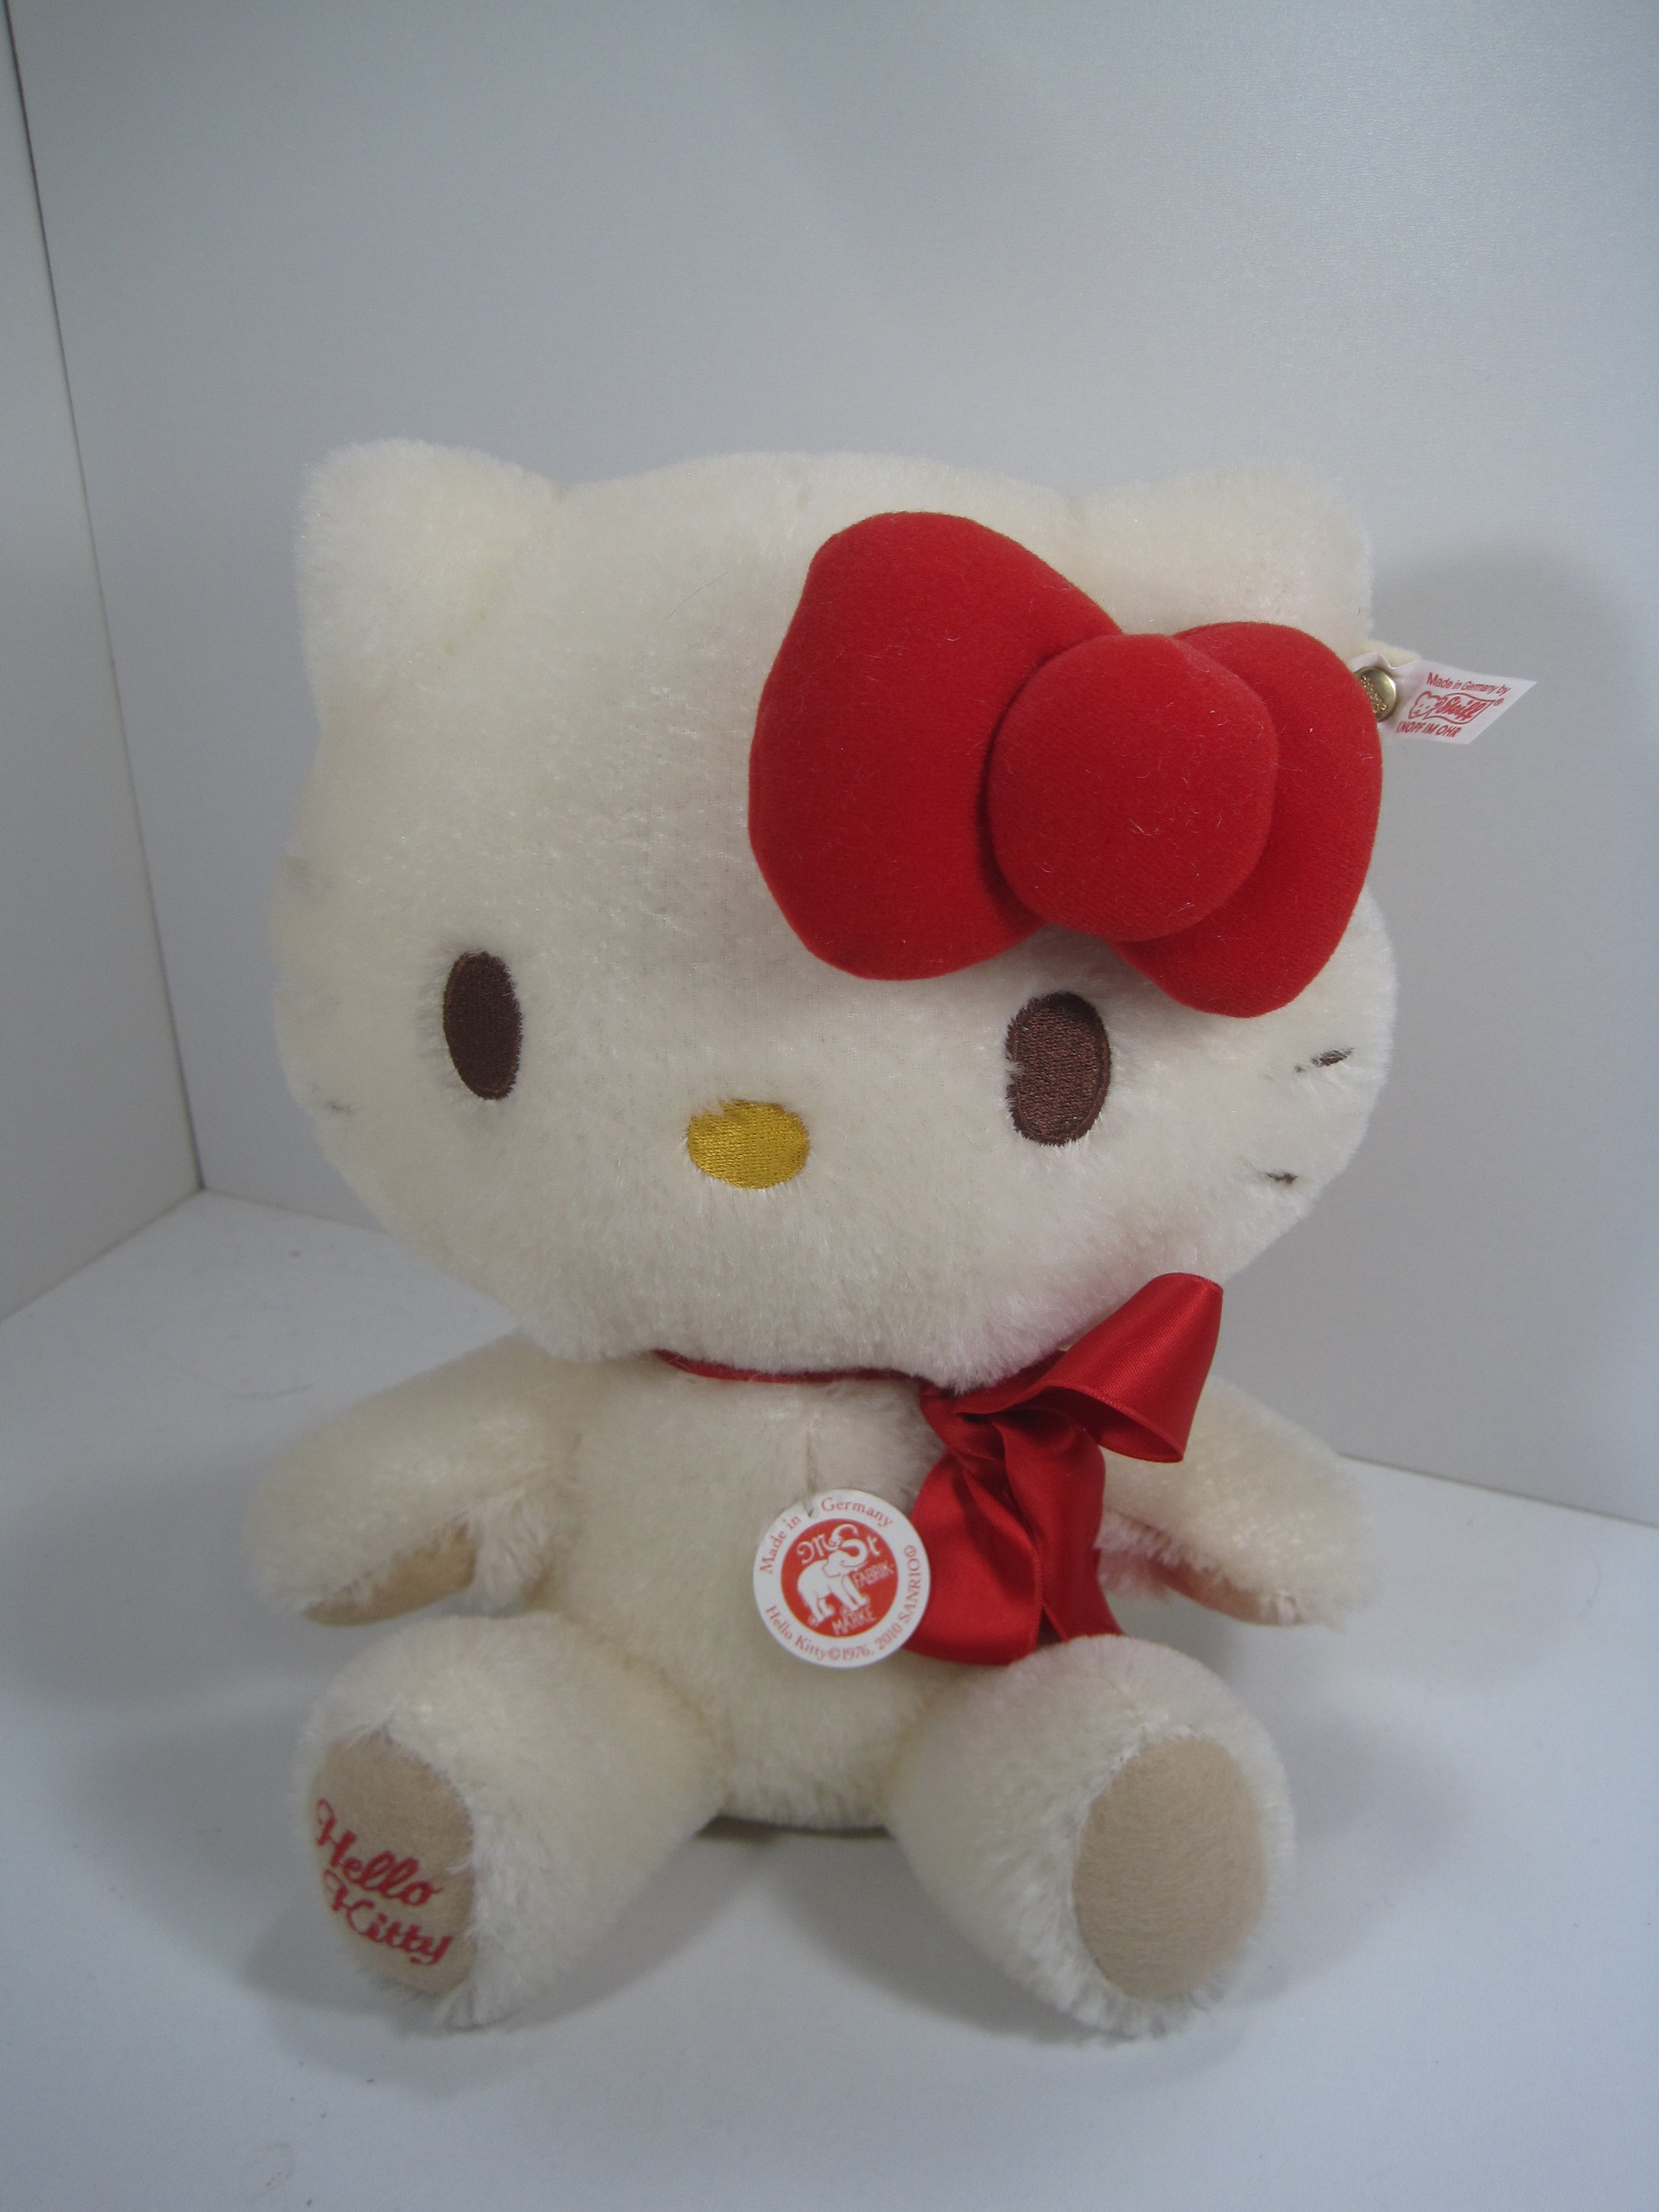 Sanrio Hello Kitty Iron On Patch Teddy Bear Cat 2007 Sewing Novelty NEW  (Sealed)